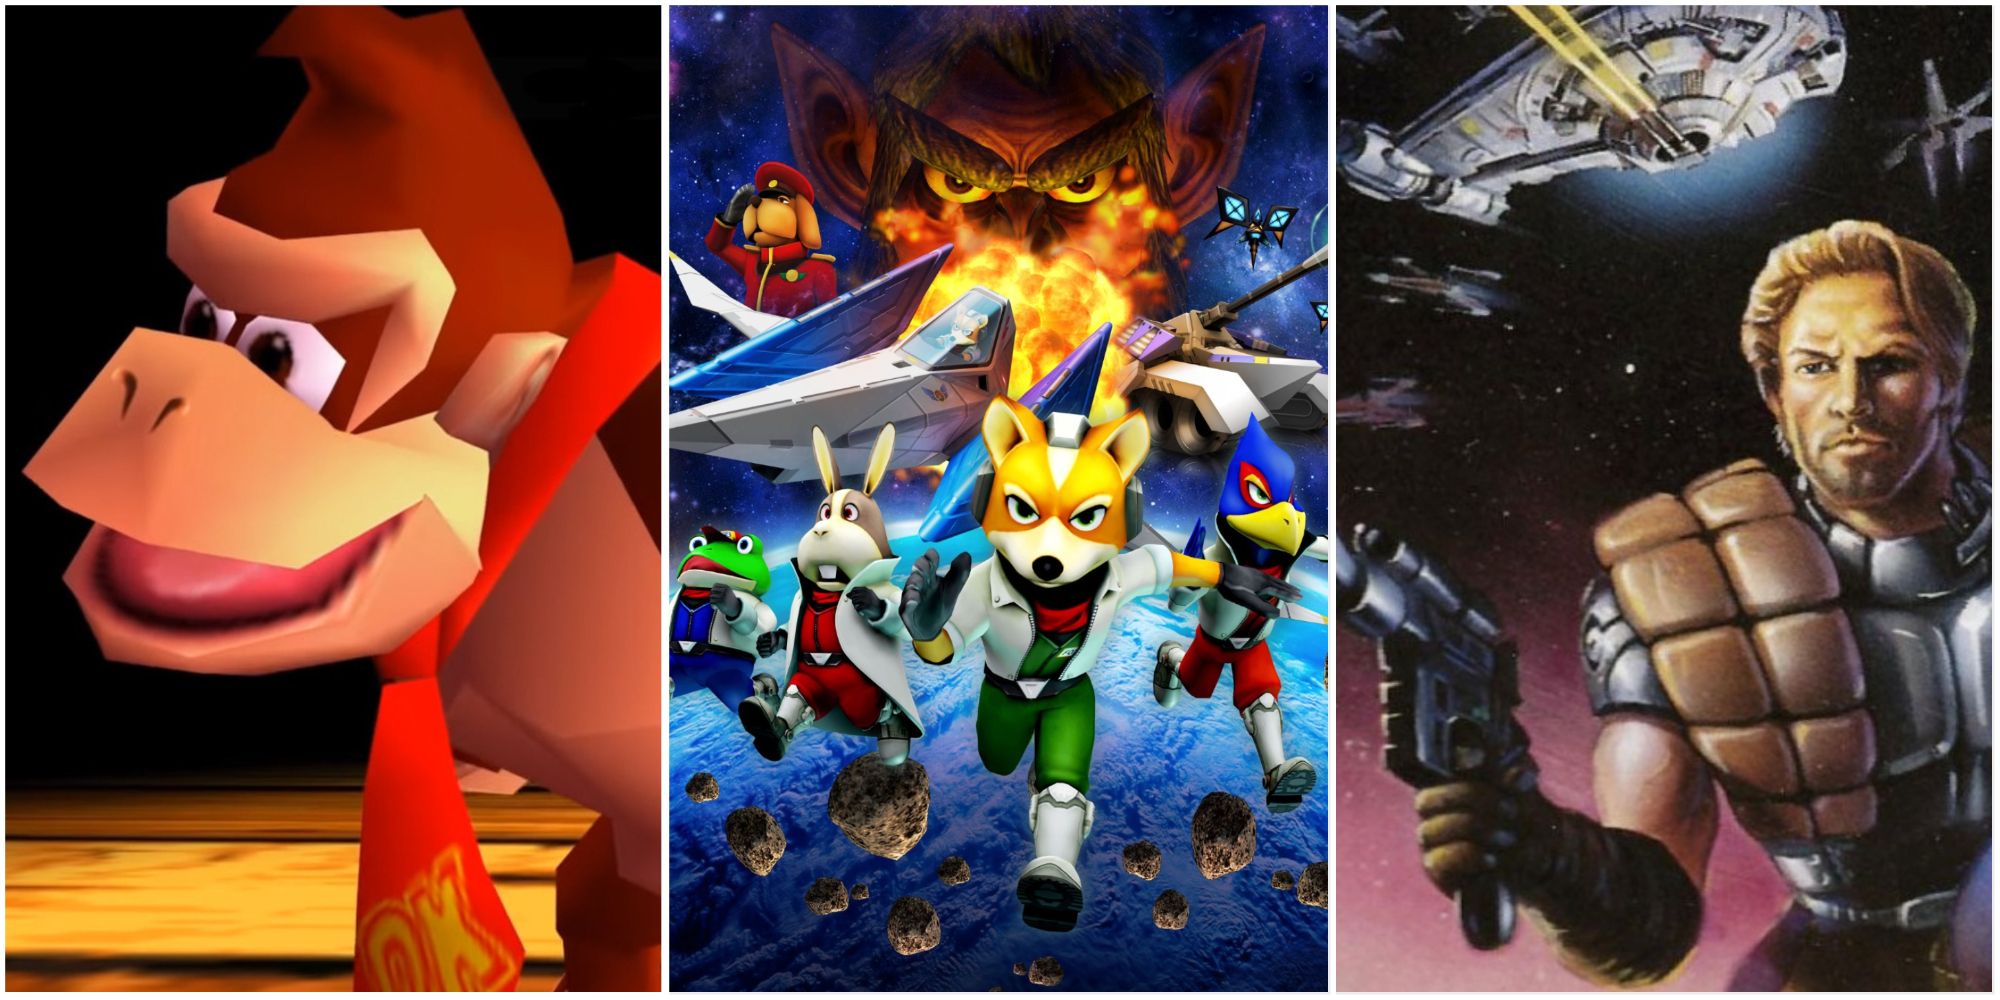 N64 Games To Play With Dad : Donkey Kong 64, Star Fox 64, Star Wars Shadows of the Empire.